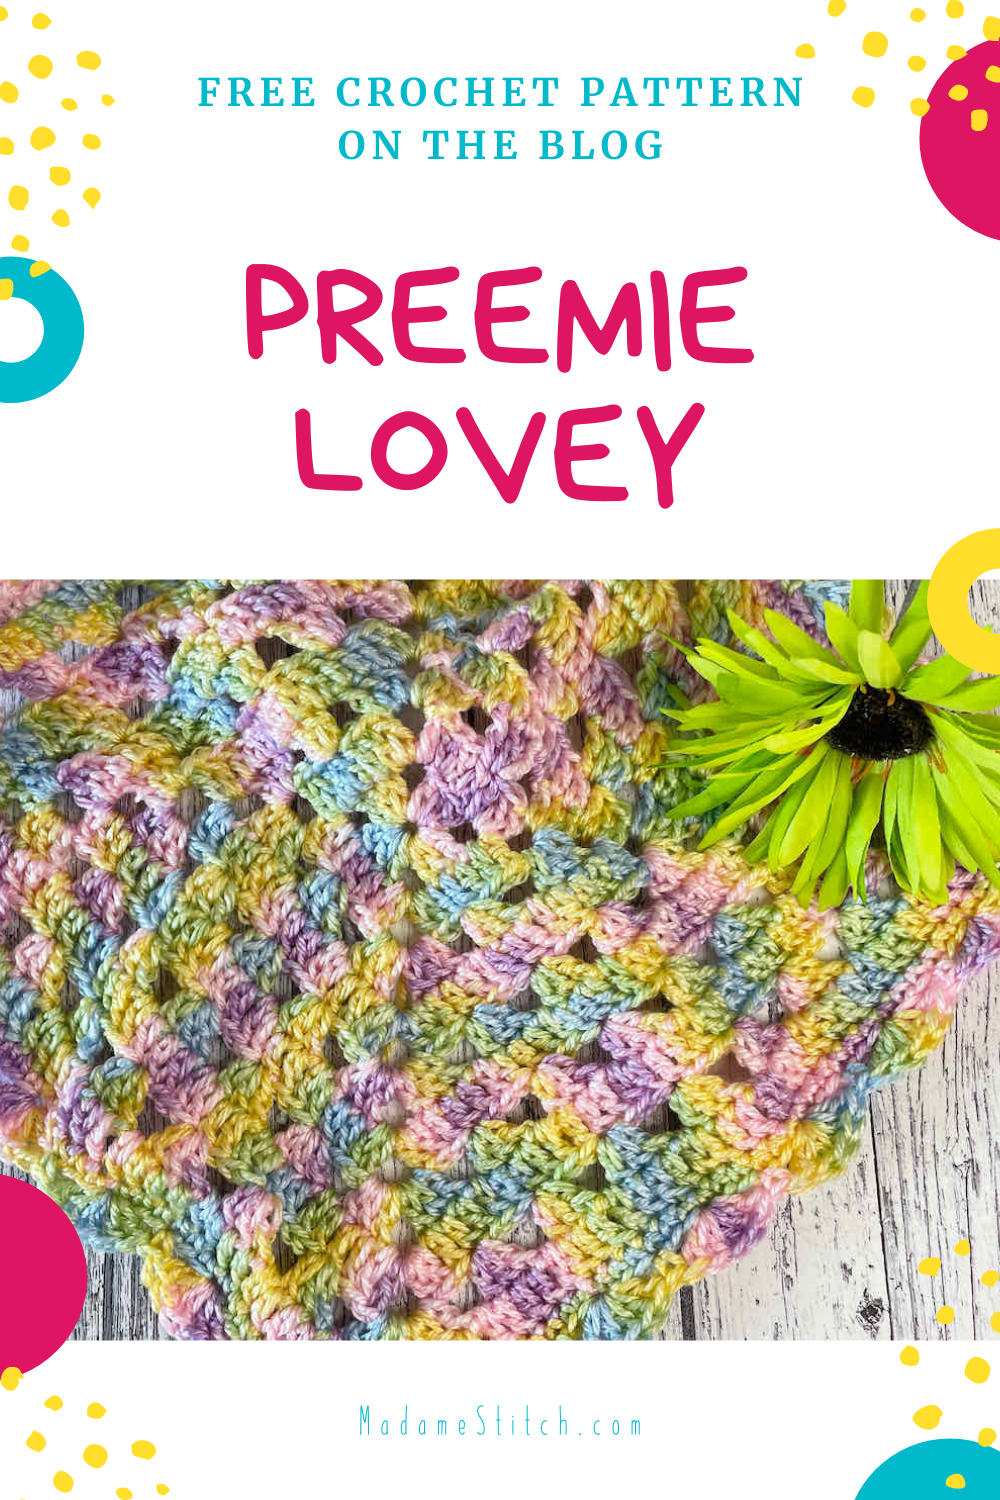 Preemie Granny Square Lovey free crochet pattern on the blog by MadameStitch